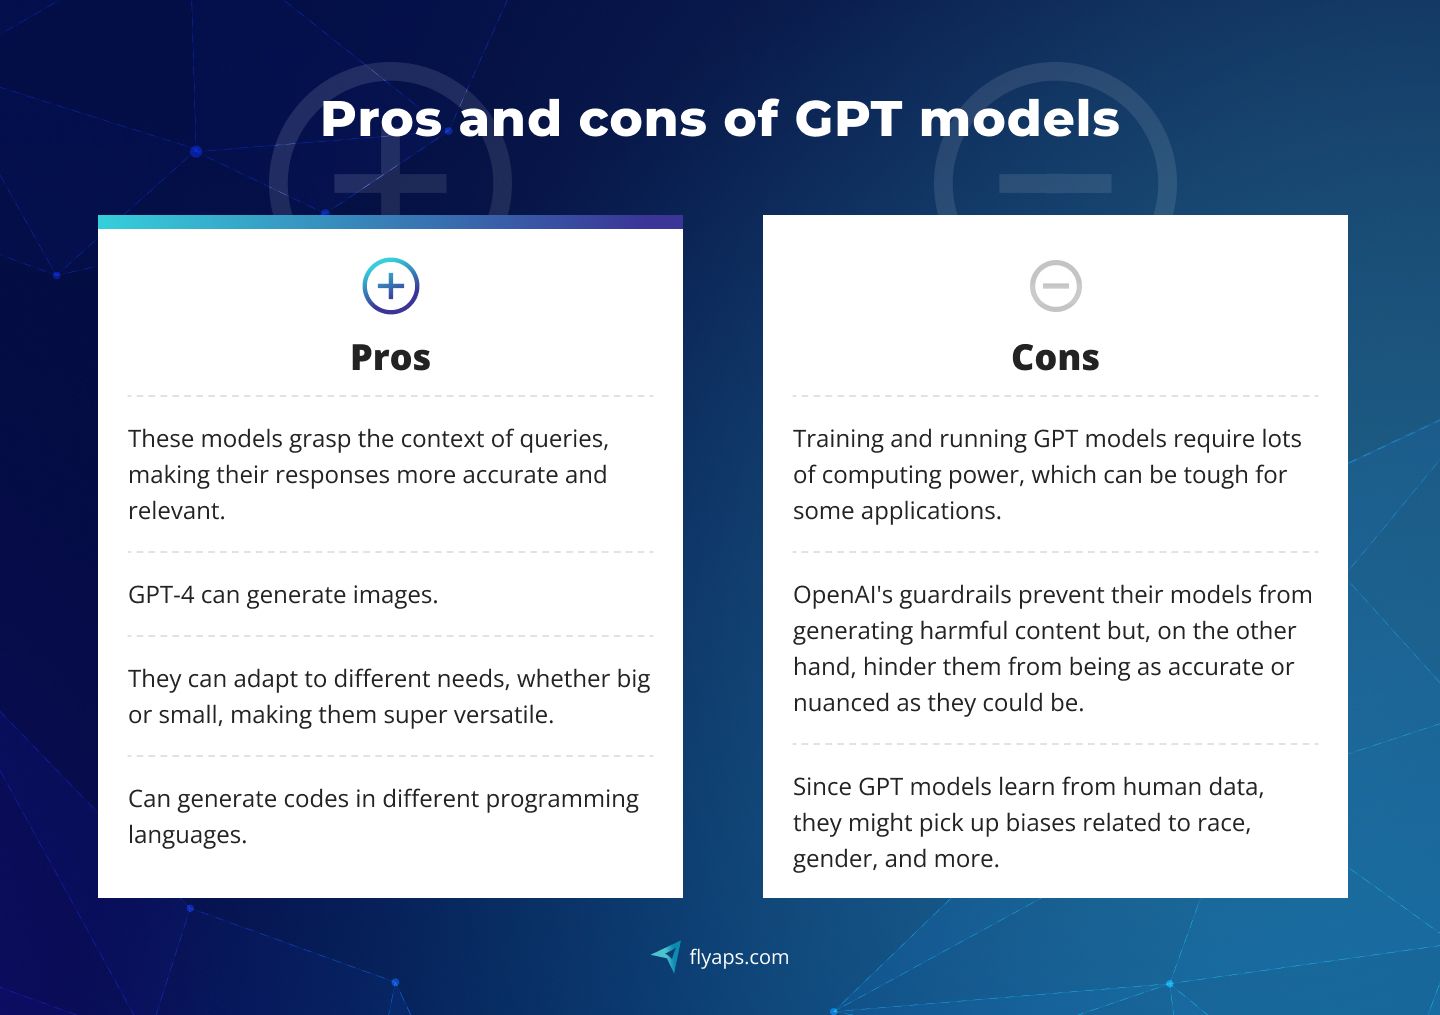 Pros and cons of GPT models